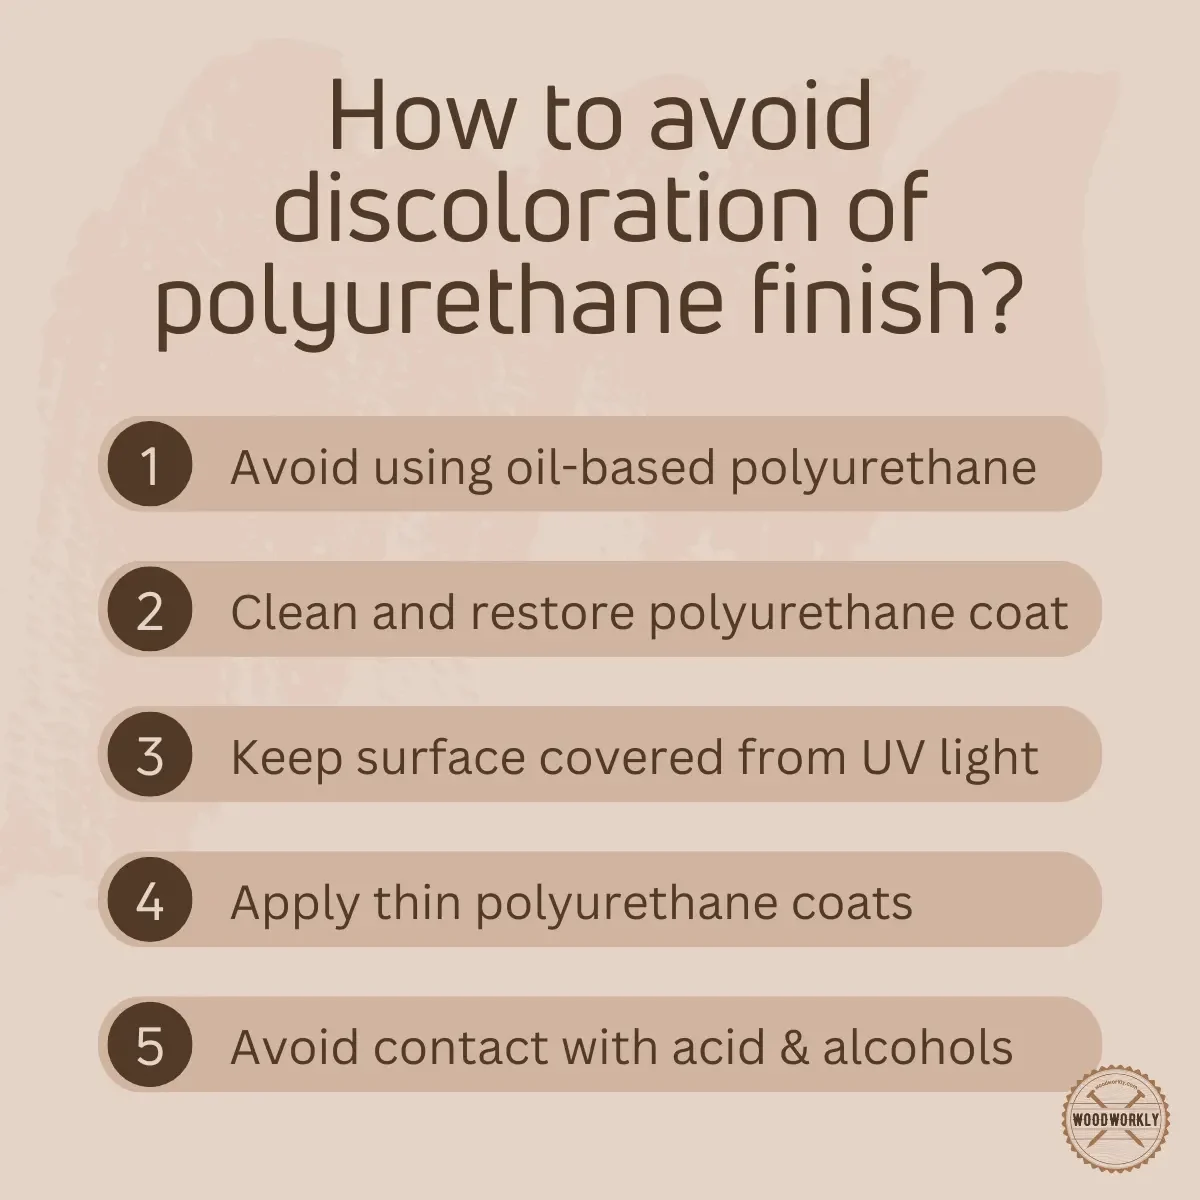 How to avoid discoloration of polyurethane finish